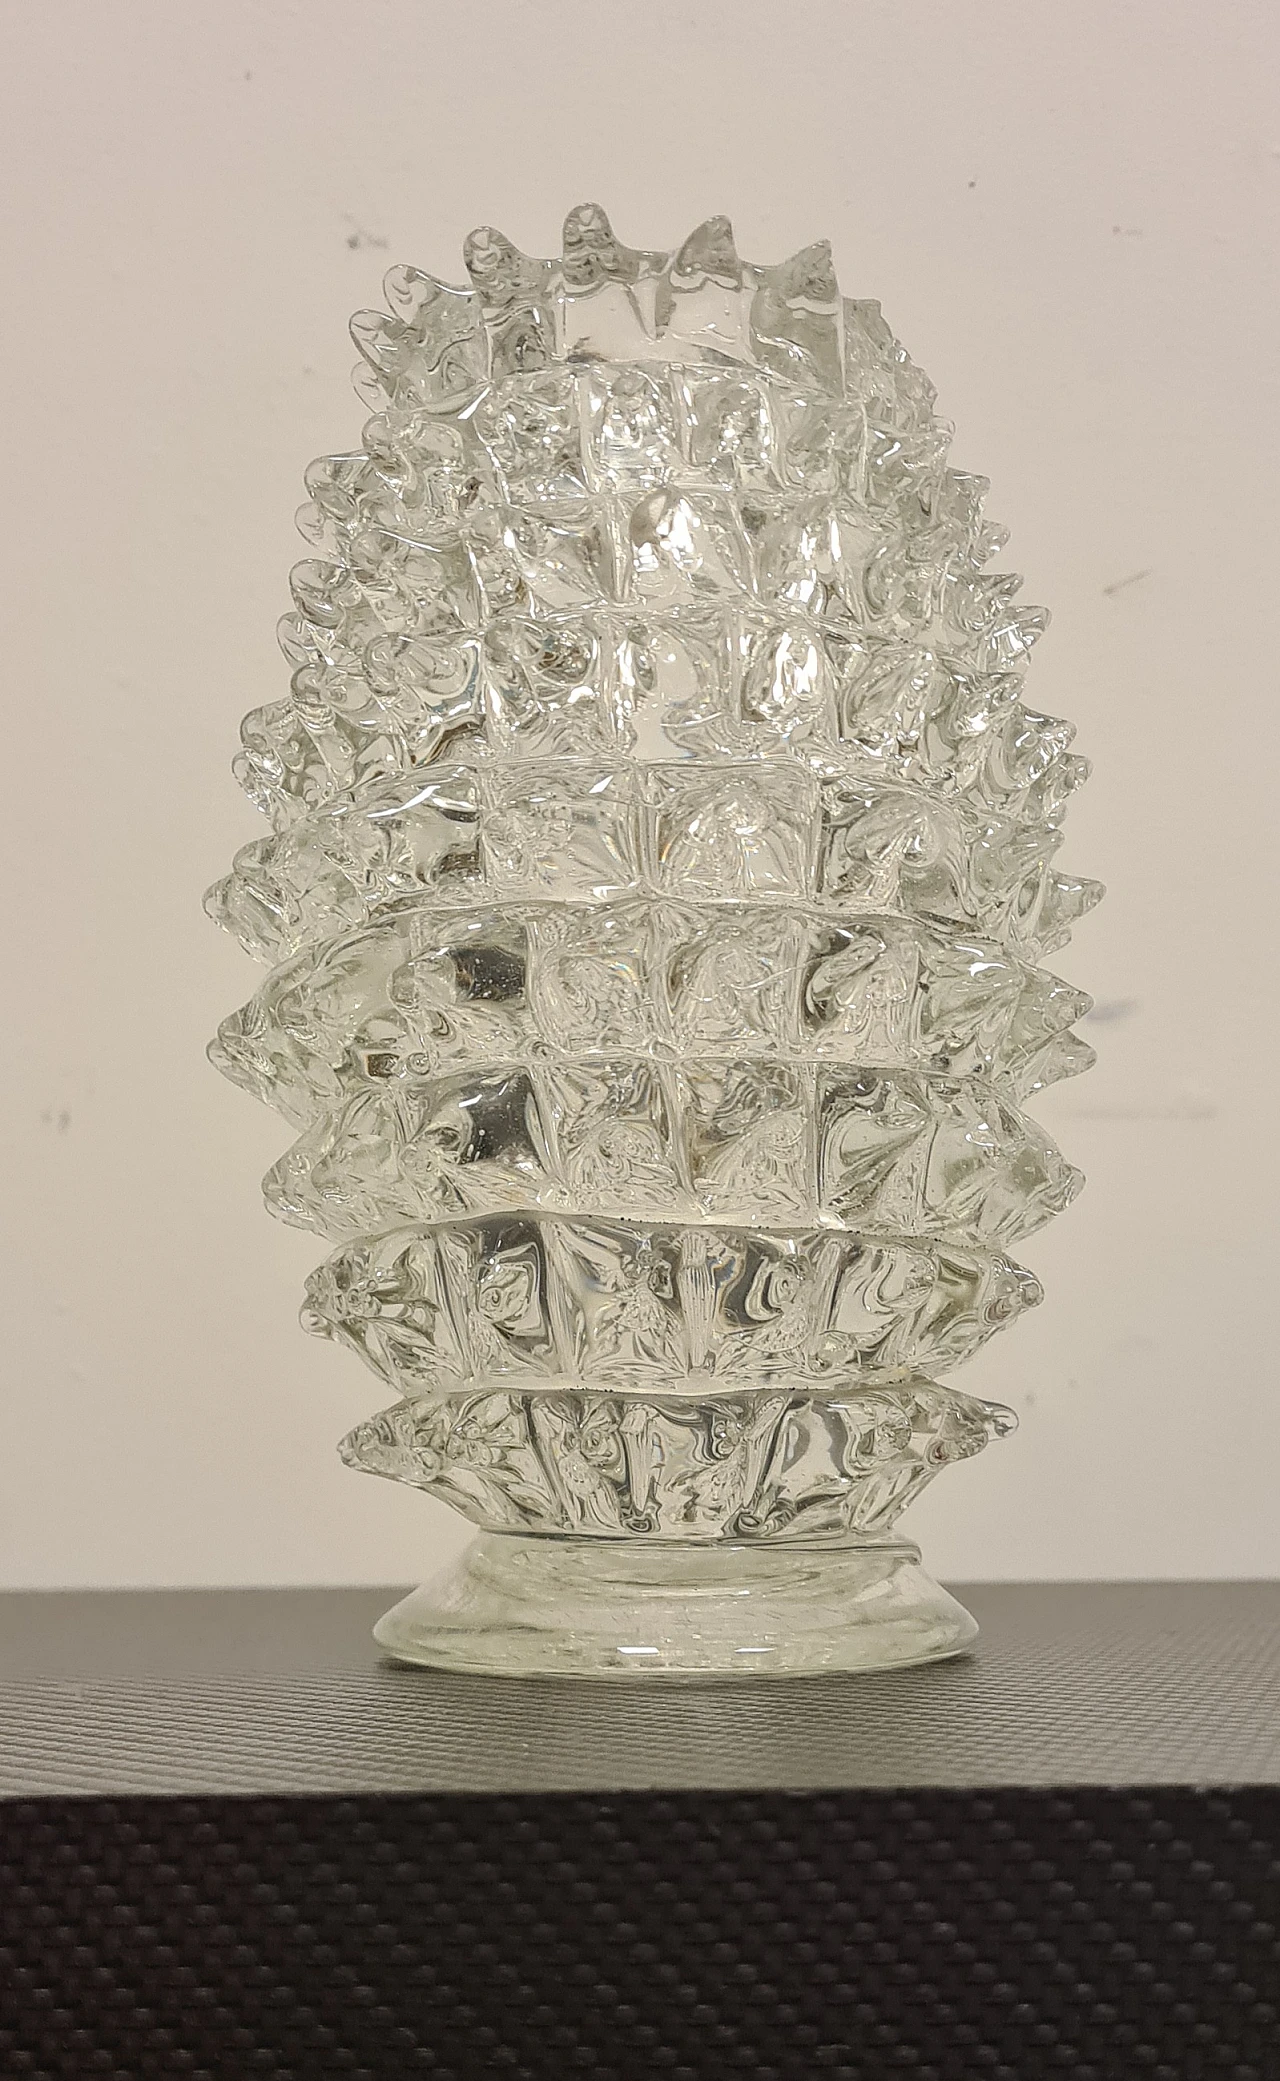 Rostered Murano glass vase by Barovier and Toso, 1940s 12